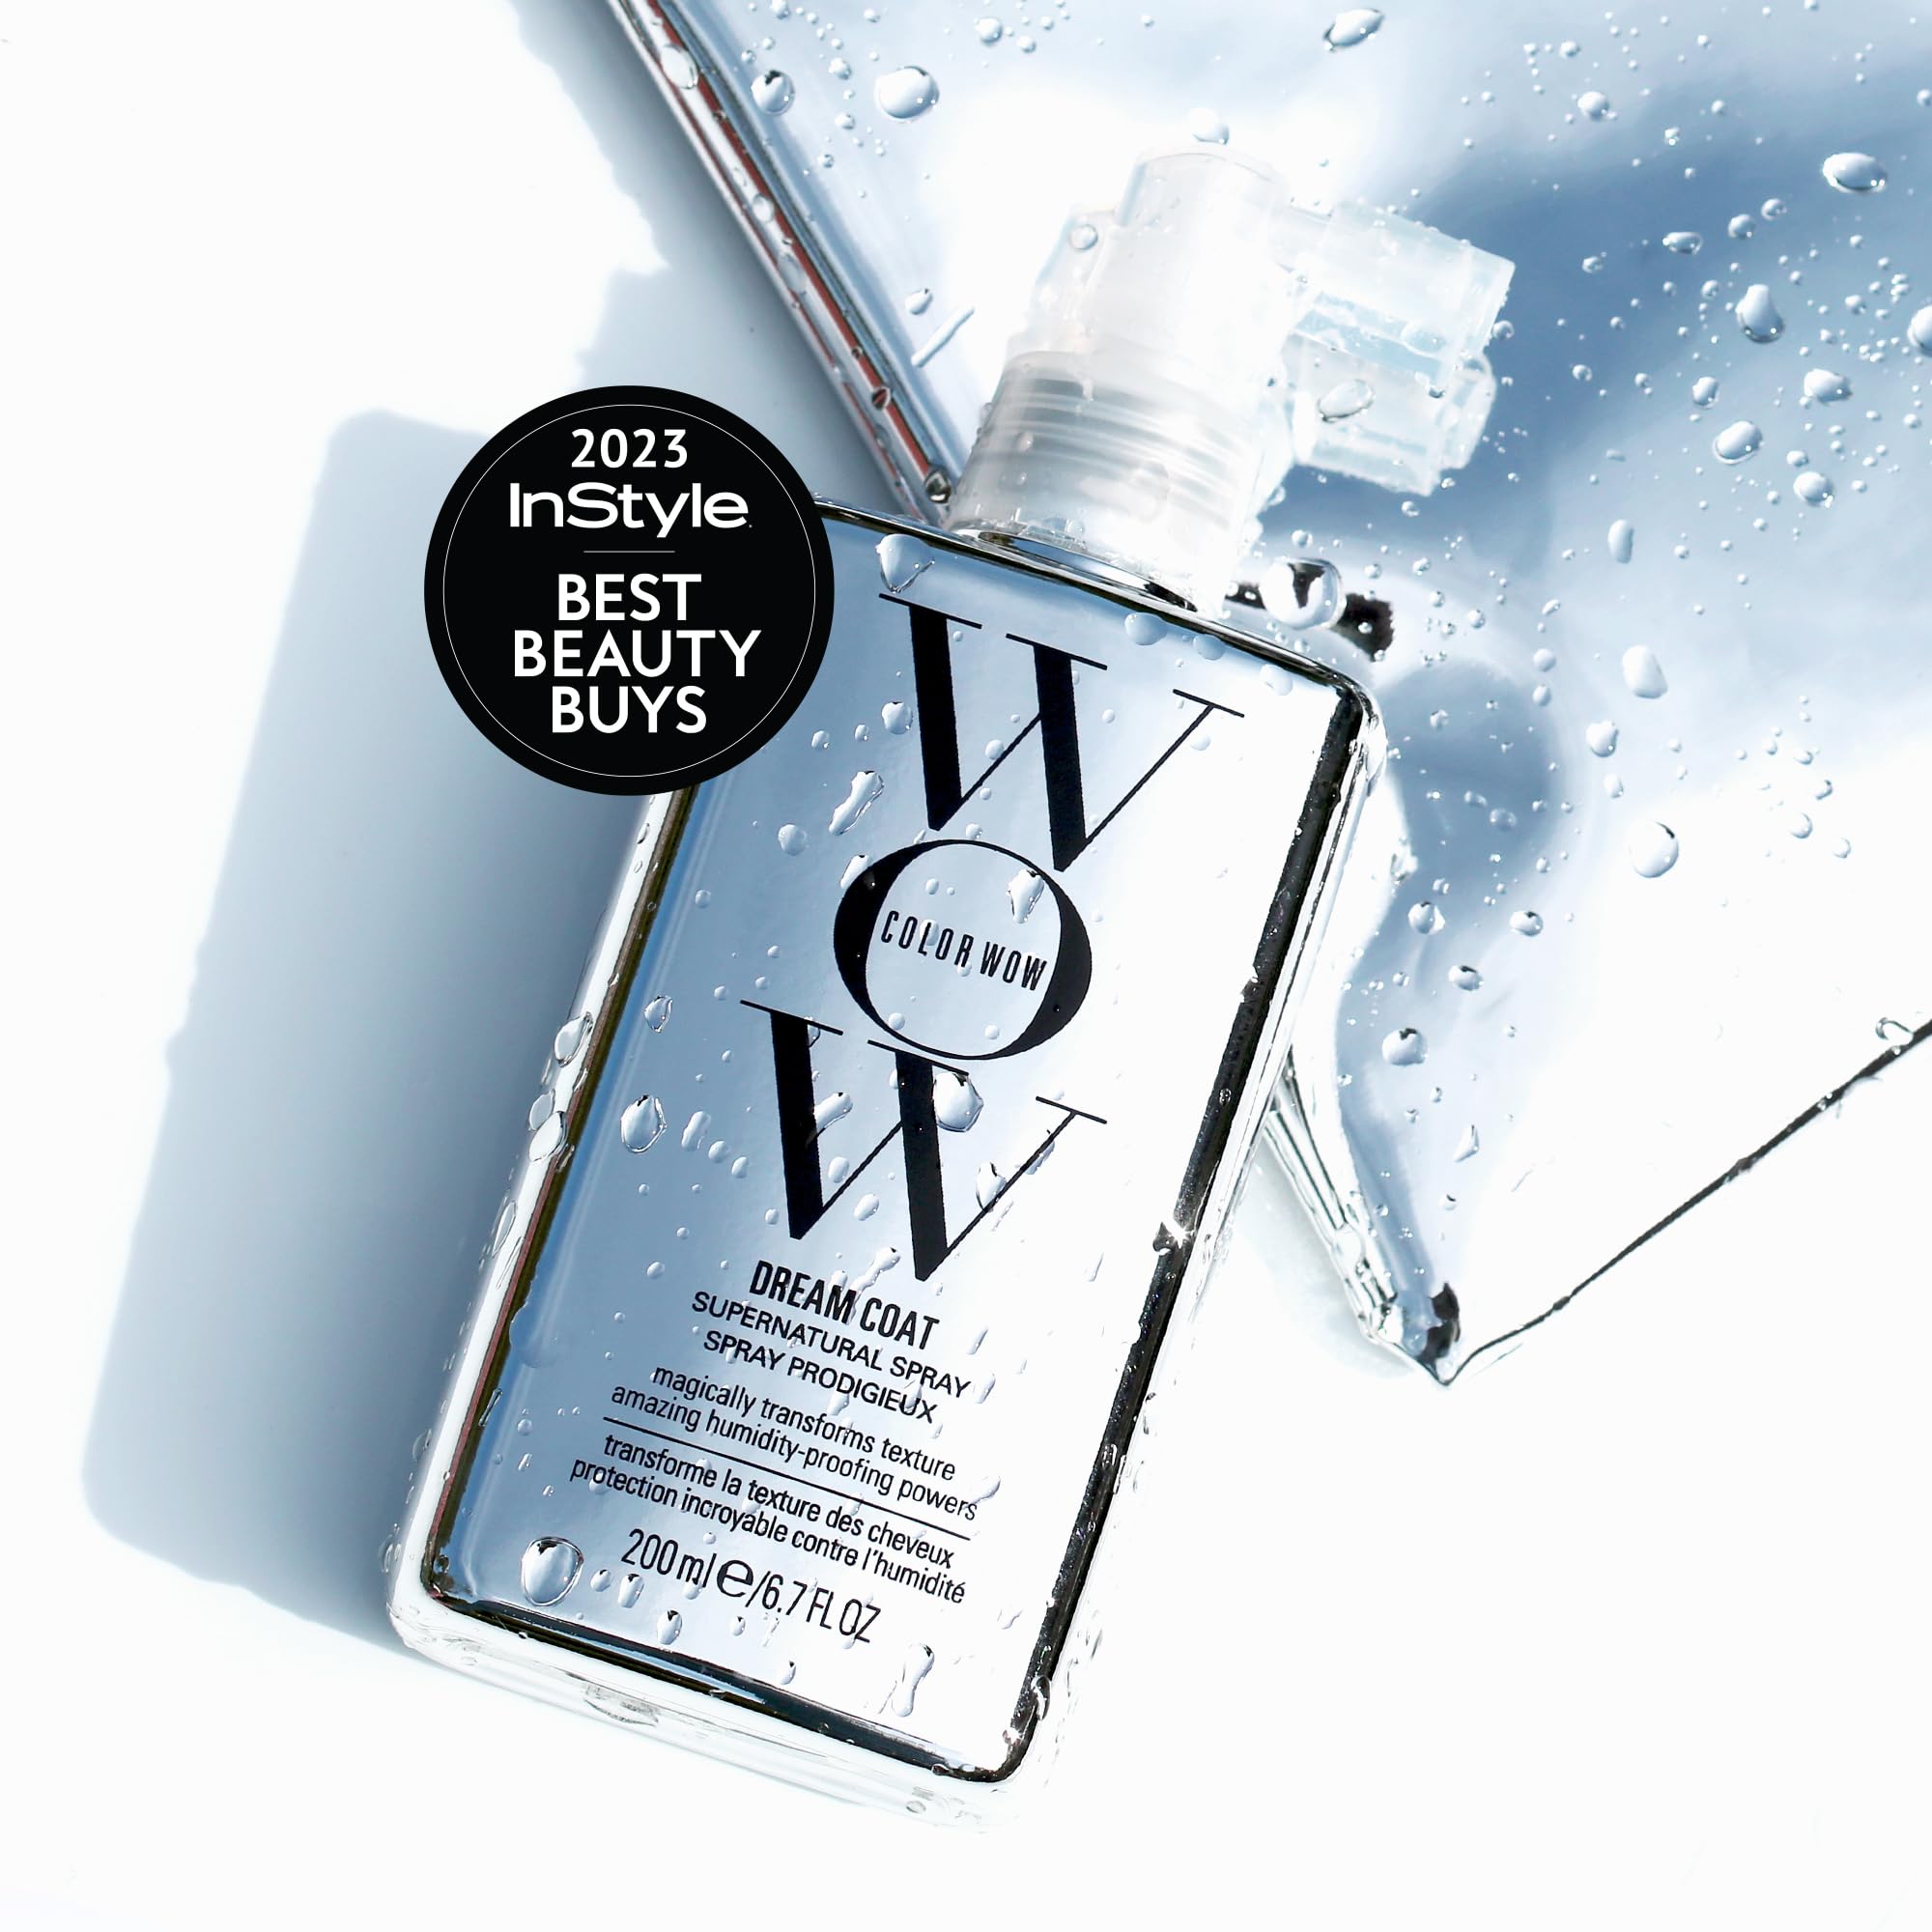 Color Wow Dream Coat Supernatural Spray – Multi award winning anti frizz spray keeps hair frizz free for days no matter the weather with moisture repellant anti humidity technology; glass hair results